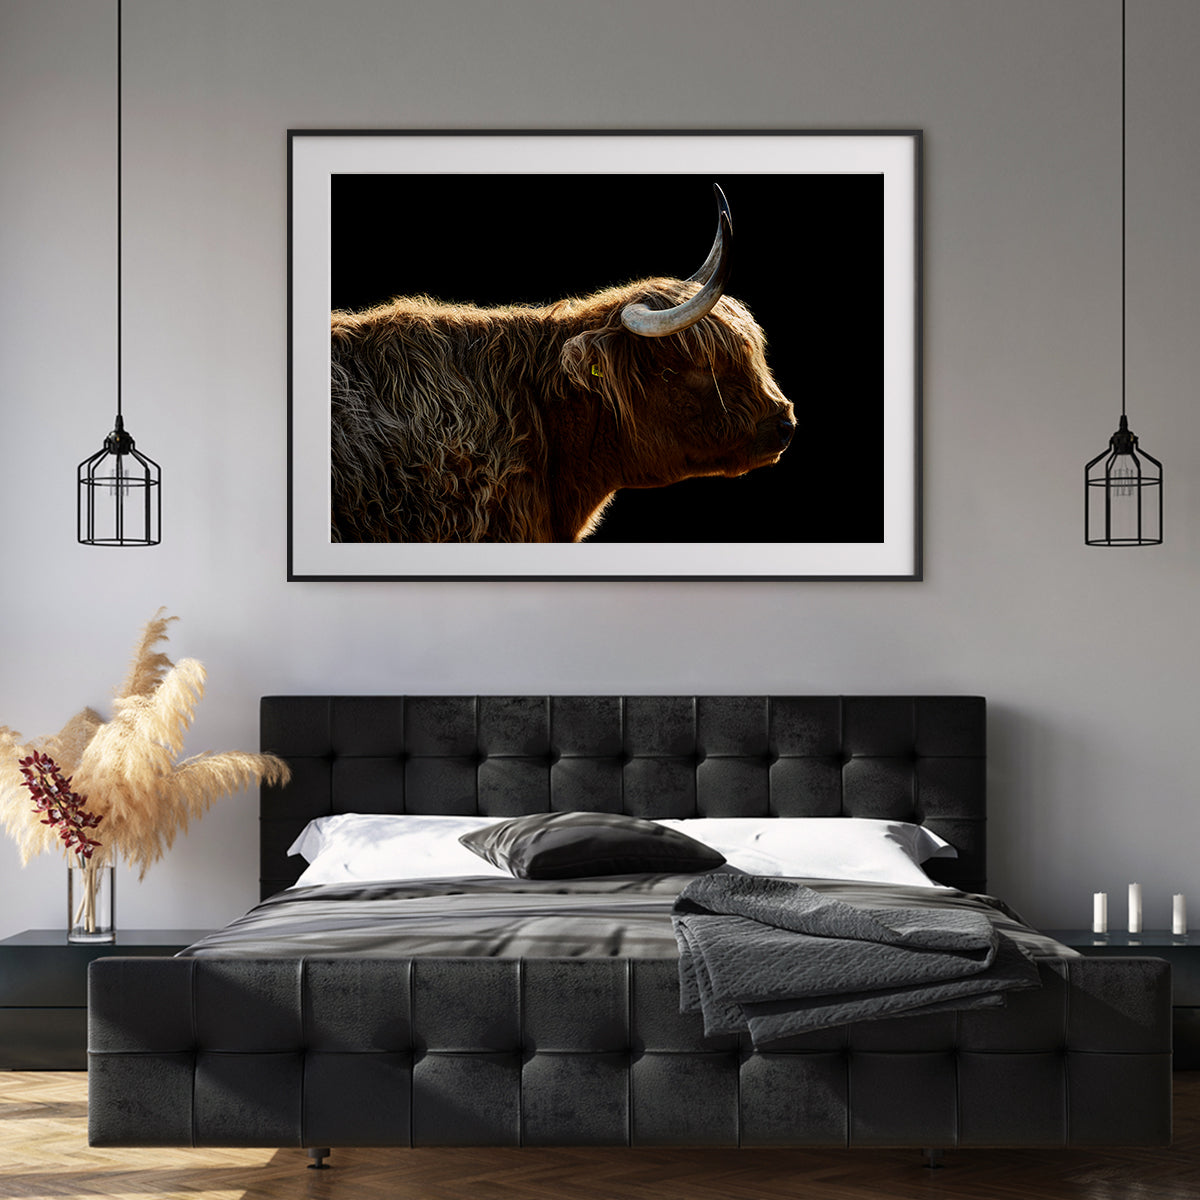 Highland Cow Wall Art Poster-Horizontal Posters NOT FRAMED-CetArt-10″x8″ inches-CetArt